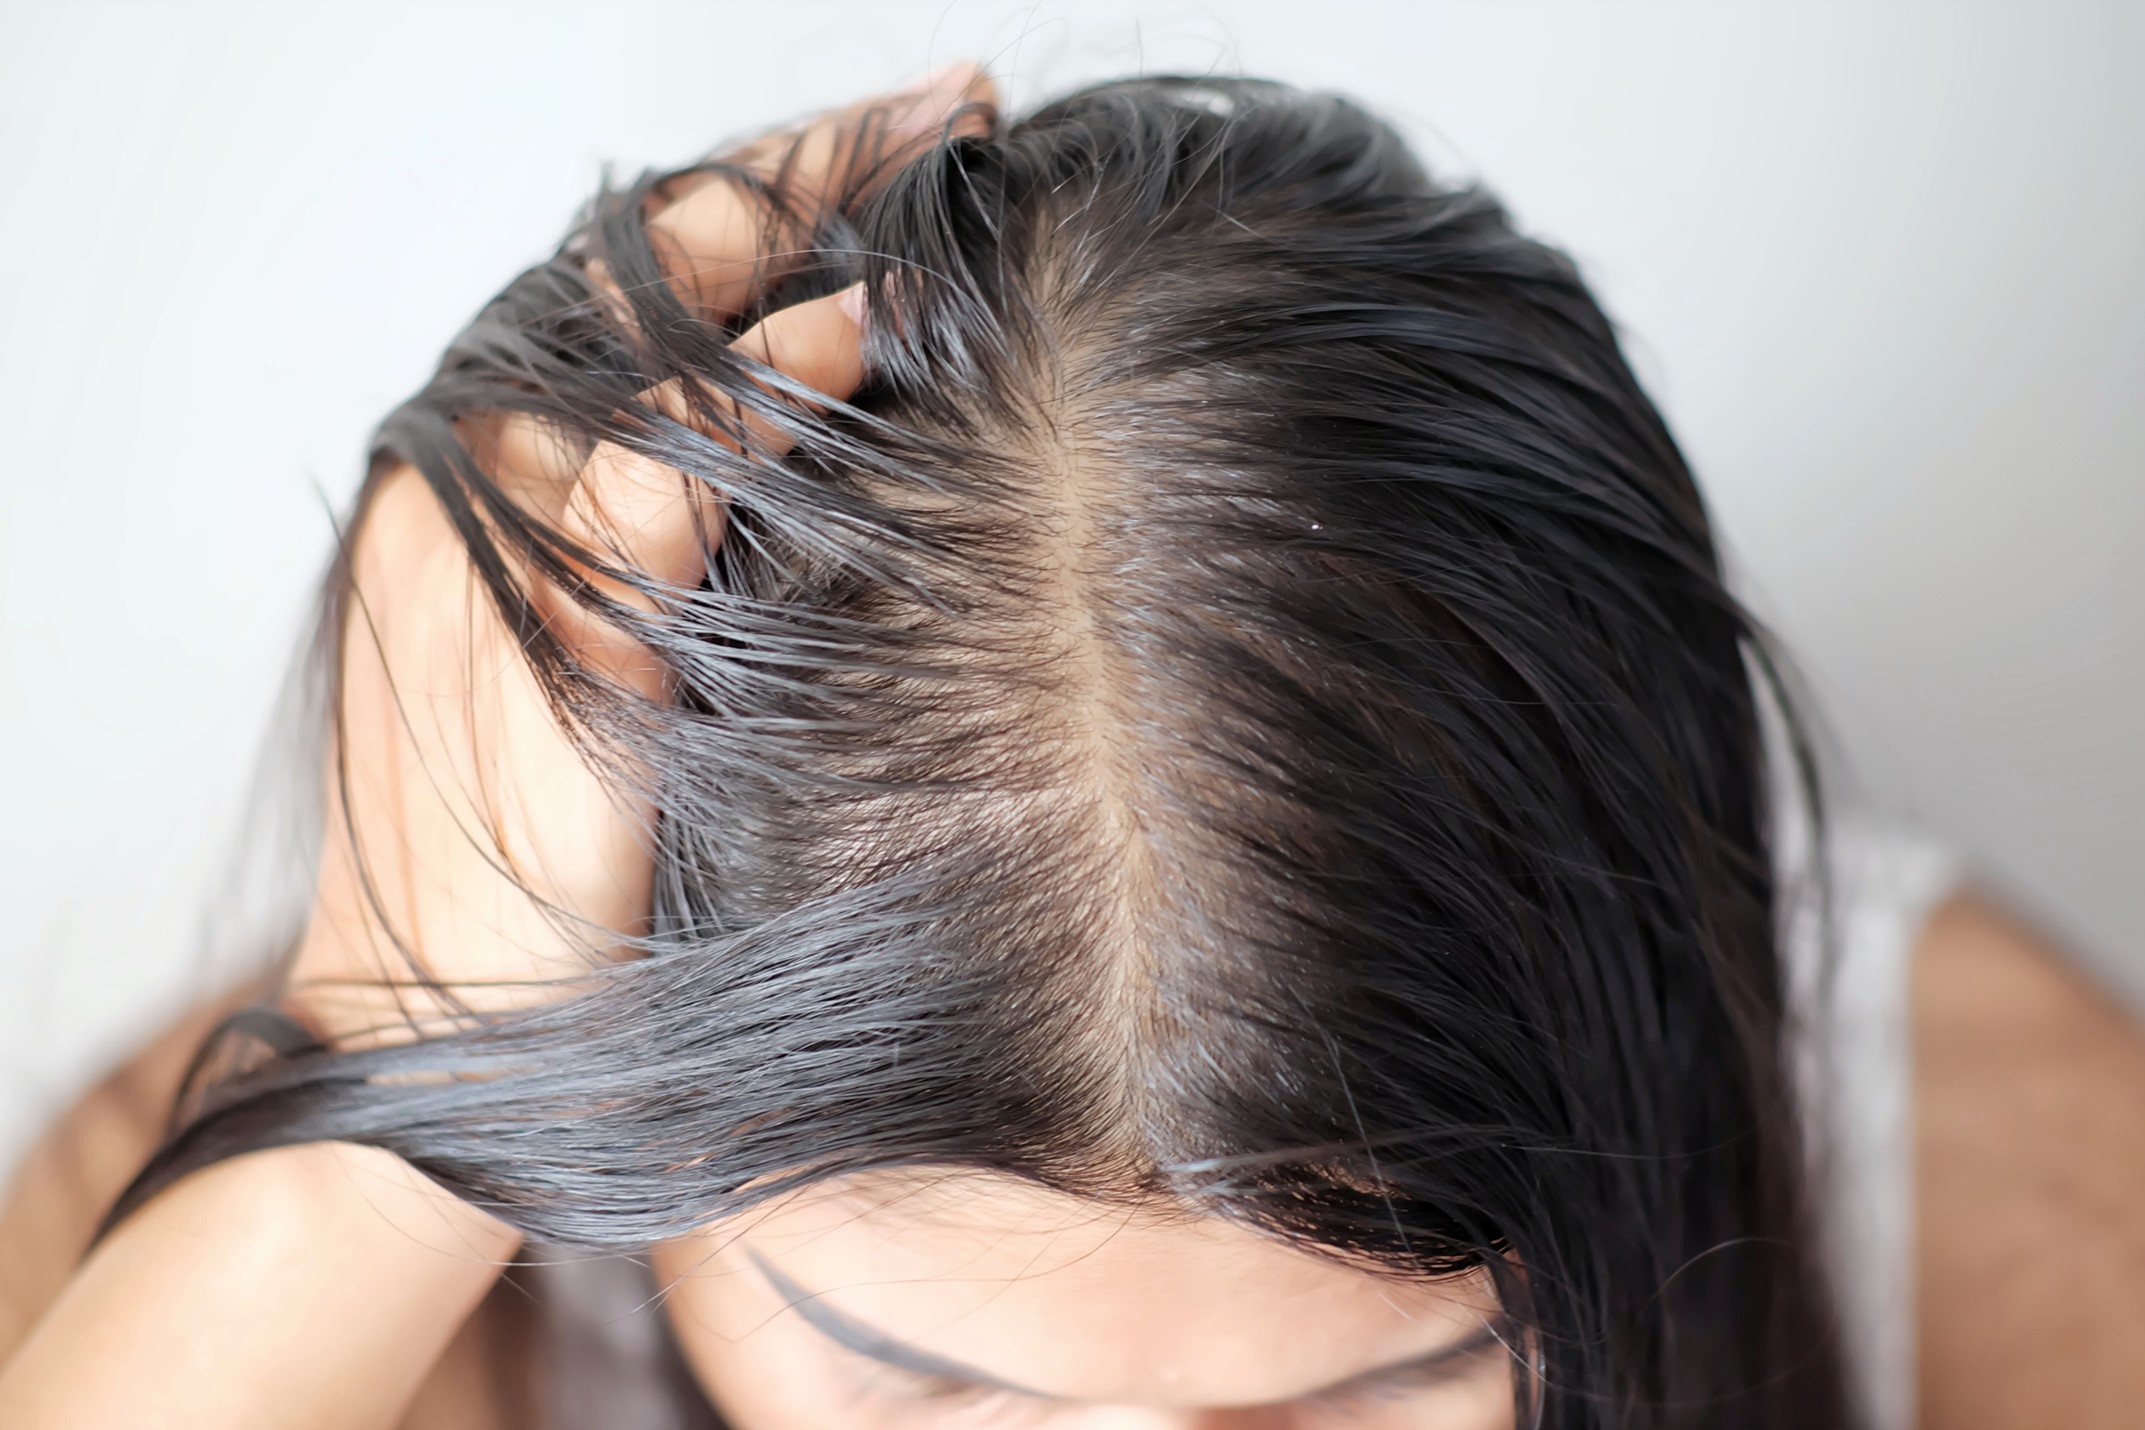 Control oily hair and scalp to prevent hair problems